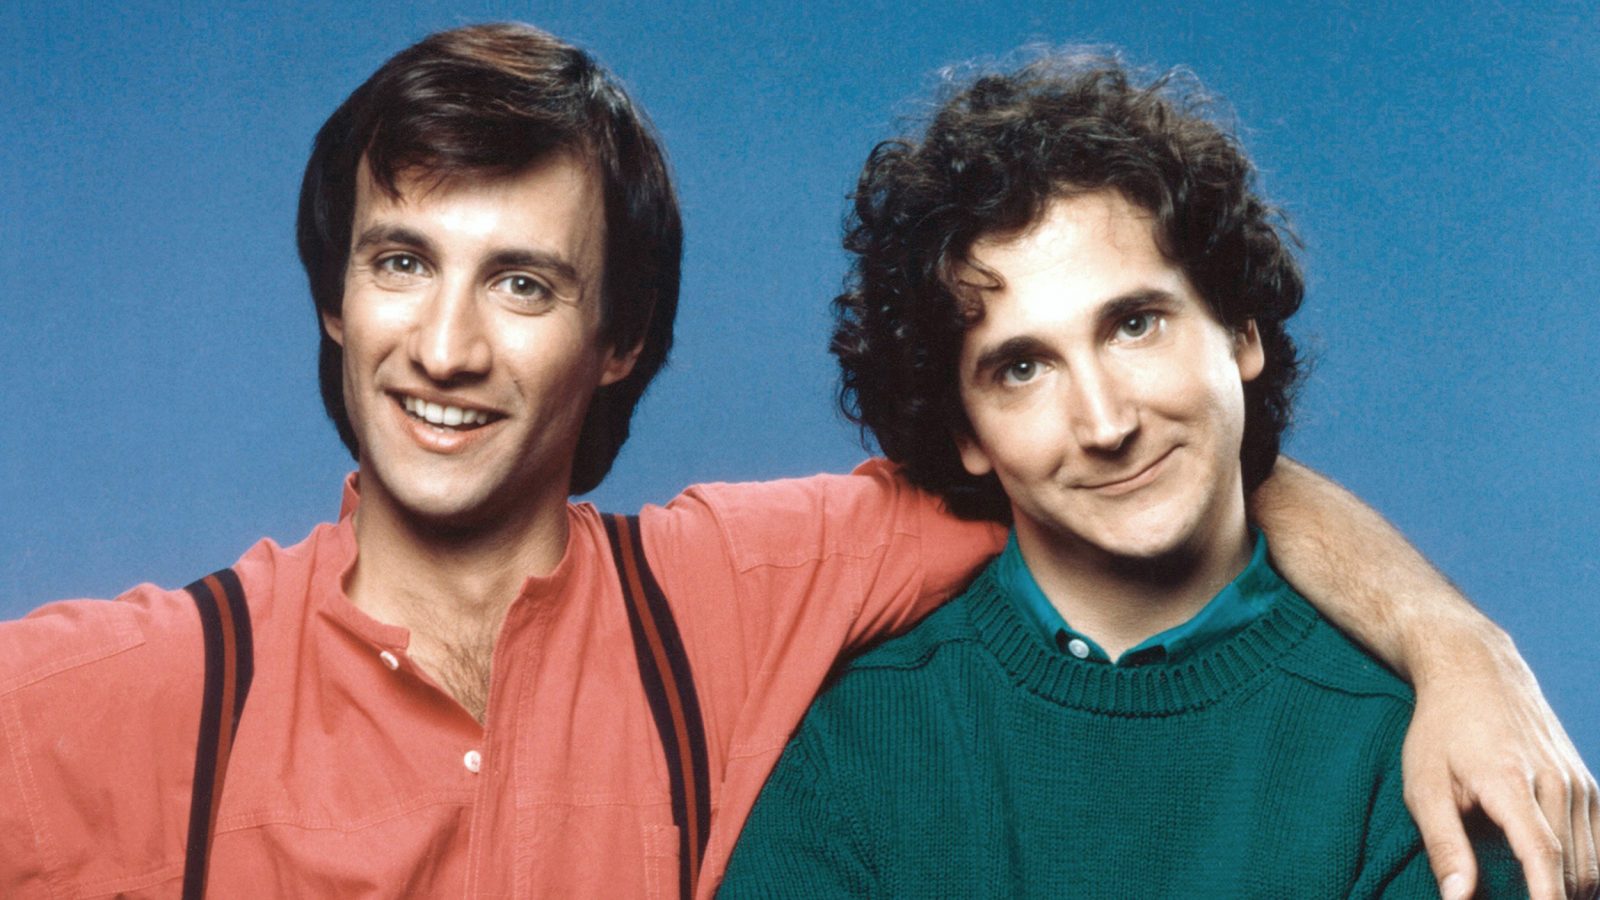 If You Ace This General Knowledge Quiz, You May Be Too Smart Perfect Strangers Bronson Pinchot Mark Linn Baker Today 170421 Tease 1 Bec32a5e8a56b473edb755d819ca7b16